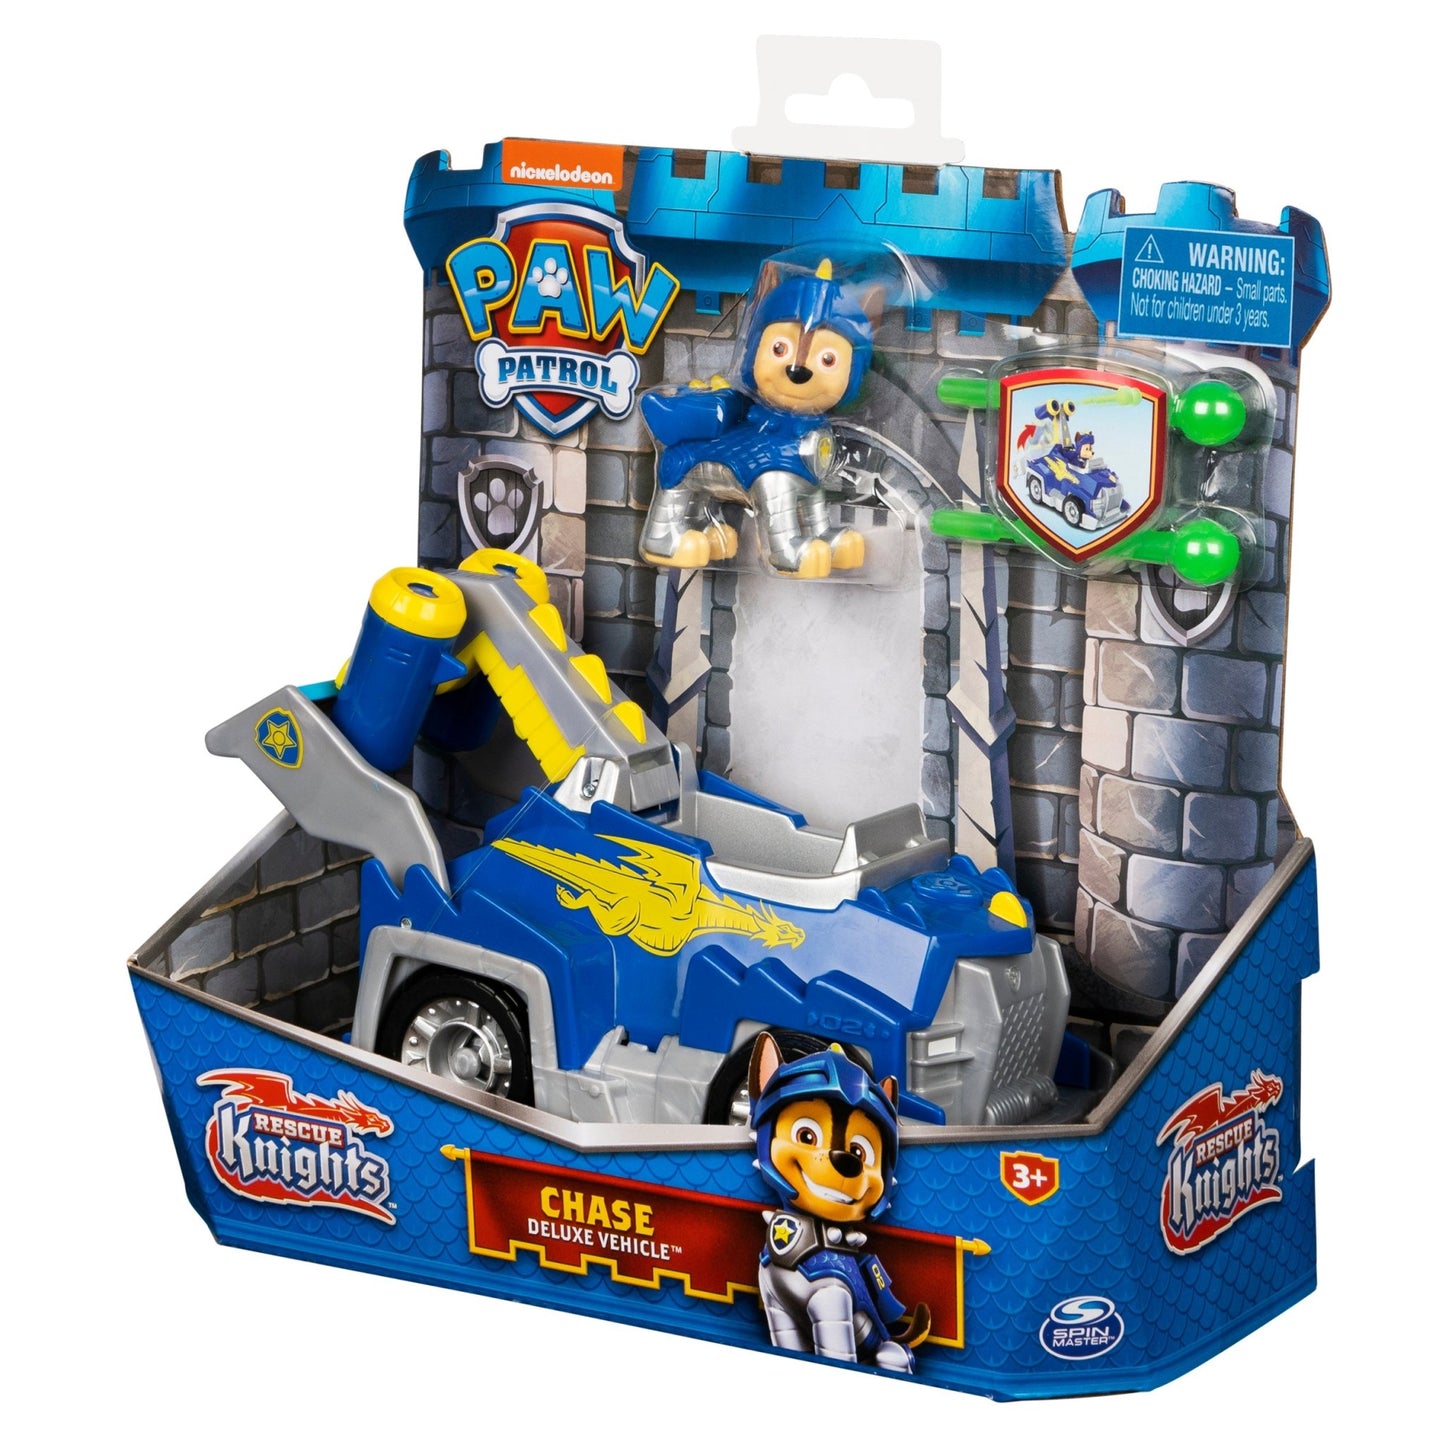 PAW Patrol, Rescue Knights Chase Transforming Toy Car with Collectible Action Figure, Kids Toys for Ages 3 and up - Paramount Shop